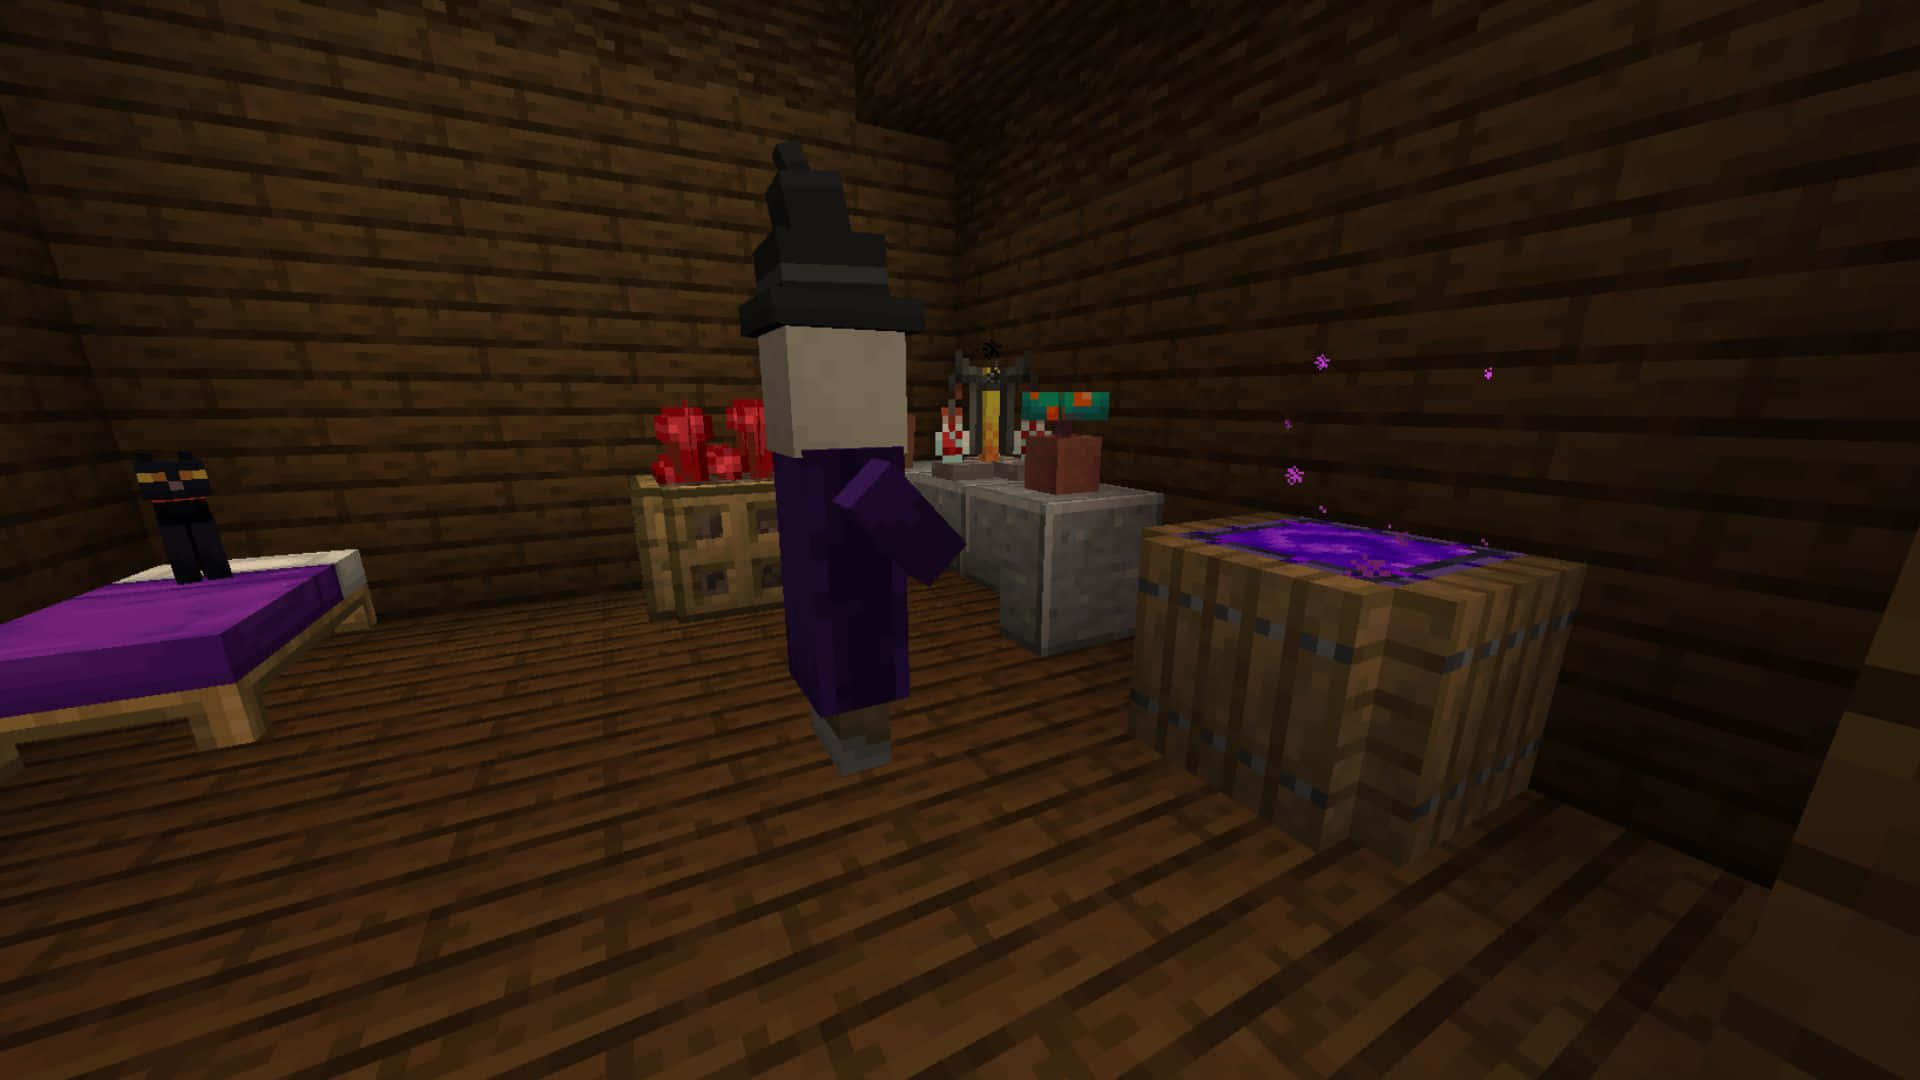 A Minecraft witch brewing potions in her spooky lair Wallpaper